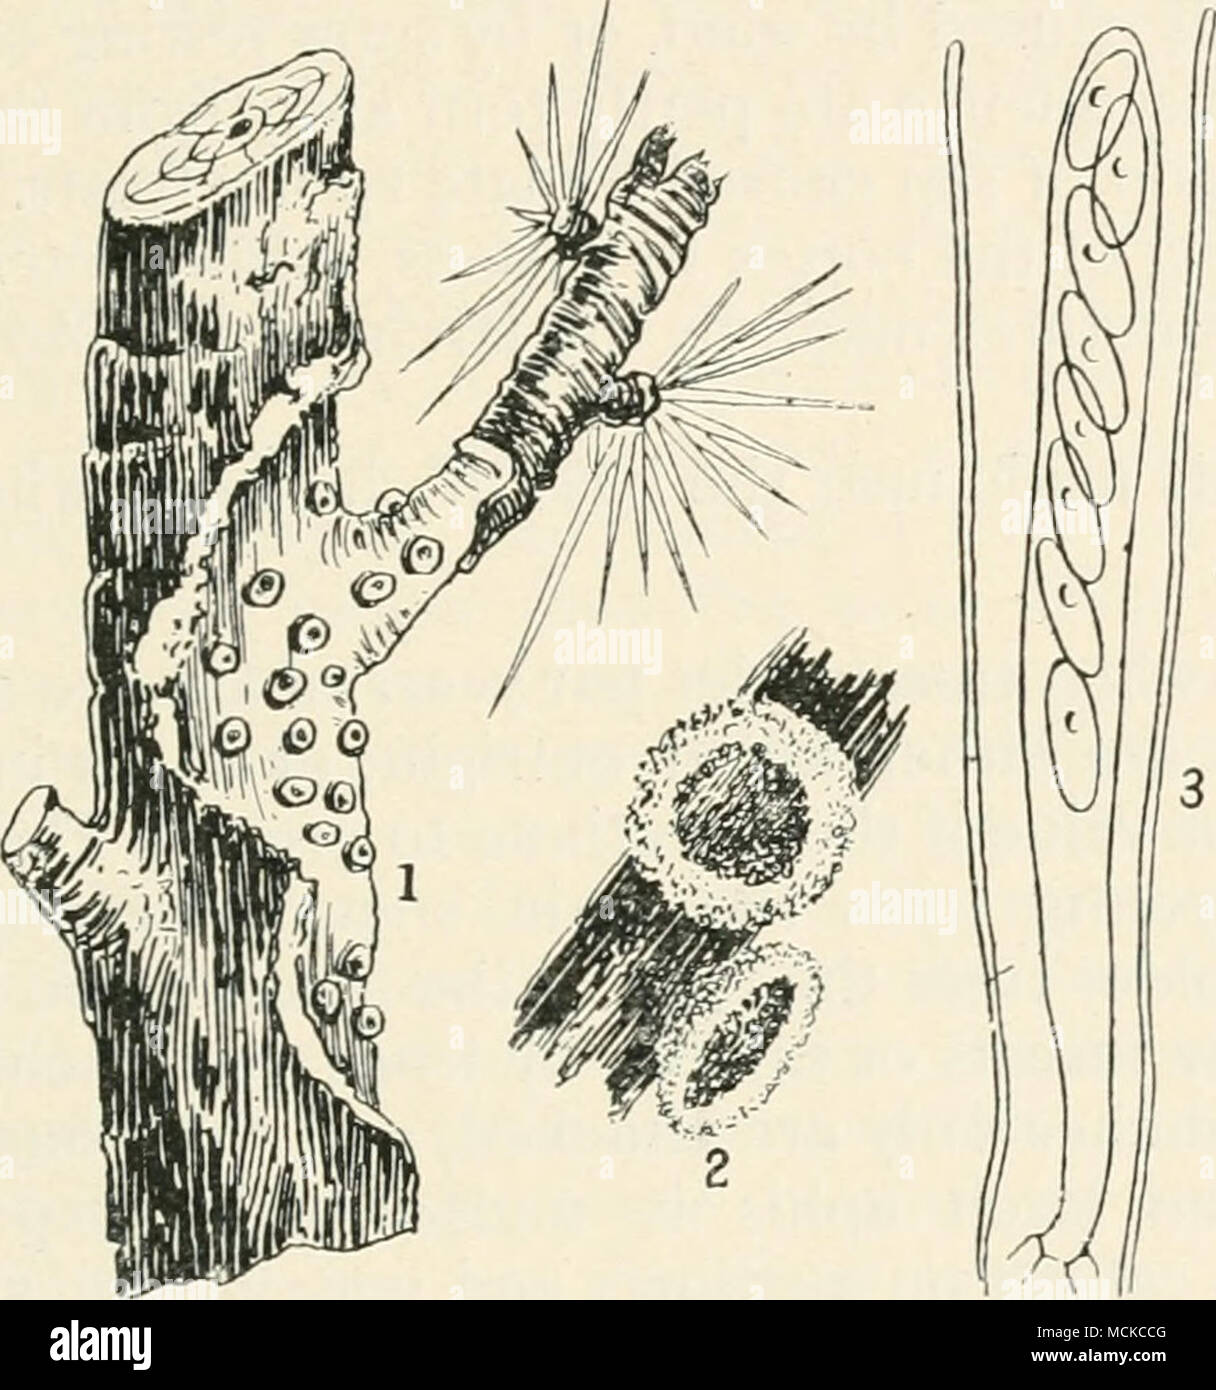 . Fig. %z.—Dasyscypha calycina. i, larch branch diseased ; 2, fungus causing disease ; 3, ascus with spores and paraphyses. Figs. 2 and 3 mag. branches of the mountain pine {Finns pumilio, Haenke), and the balsam fir {Abies ba/samea, Miller) suffers from this disease in the United States. The fungus is a wound parasite, as first indicated by Hartig ; this statement I have corroborated by over a hundred experiments on trees of various ages, and situated in different parts of the country. Fresh ascospores, that germinated readily in water, were placed on the bark of young branches, also in crevi Stock Photo